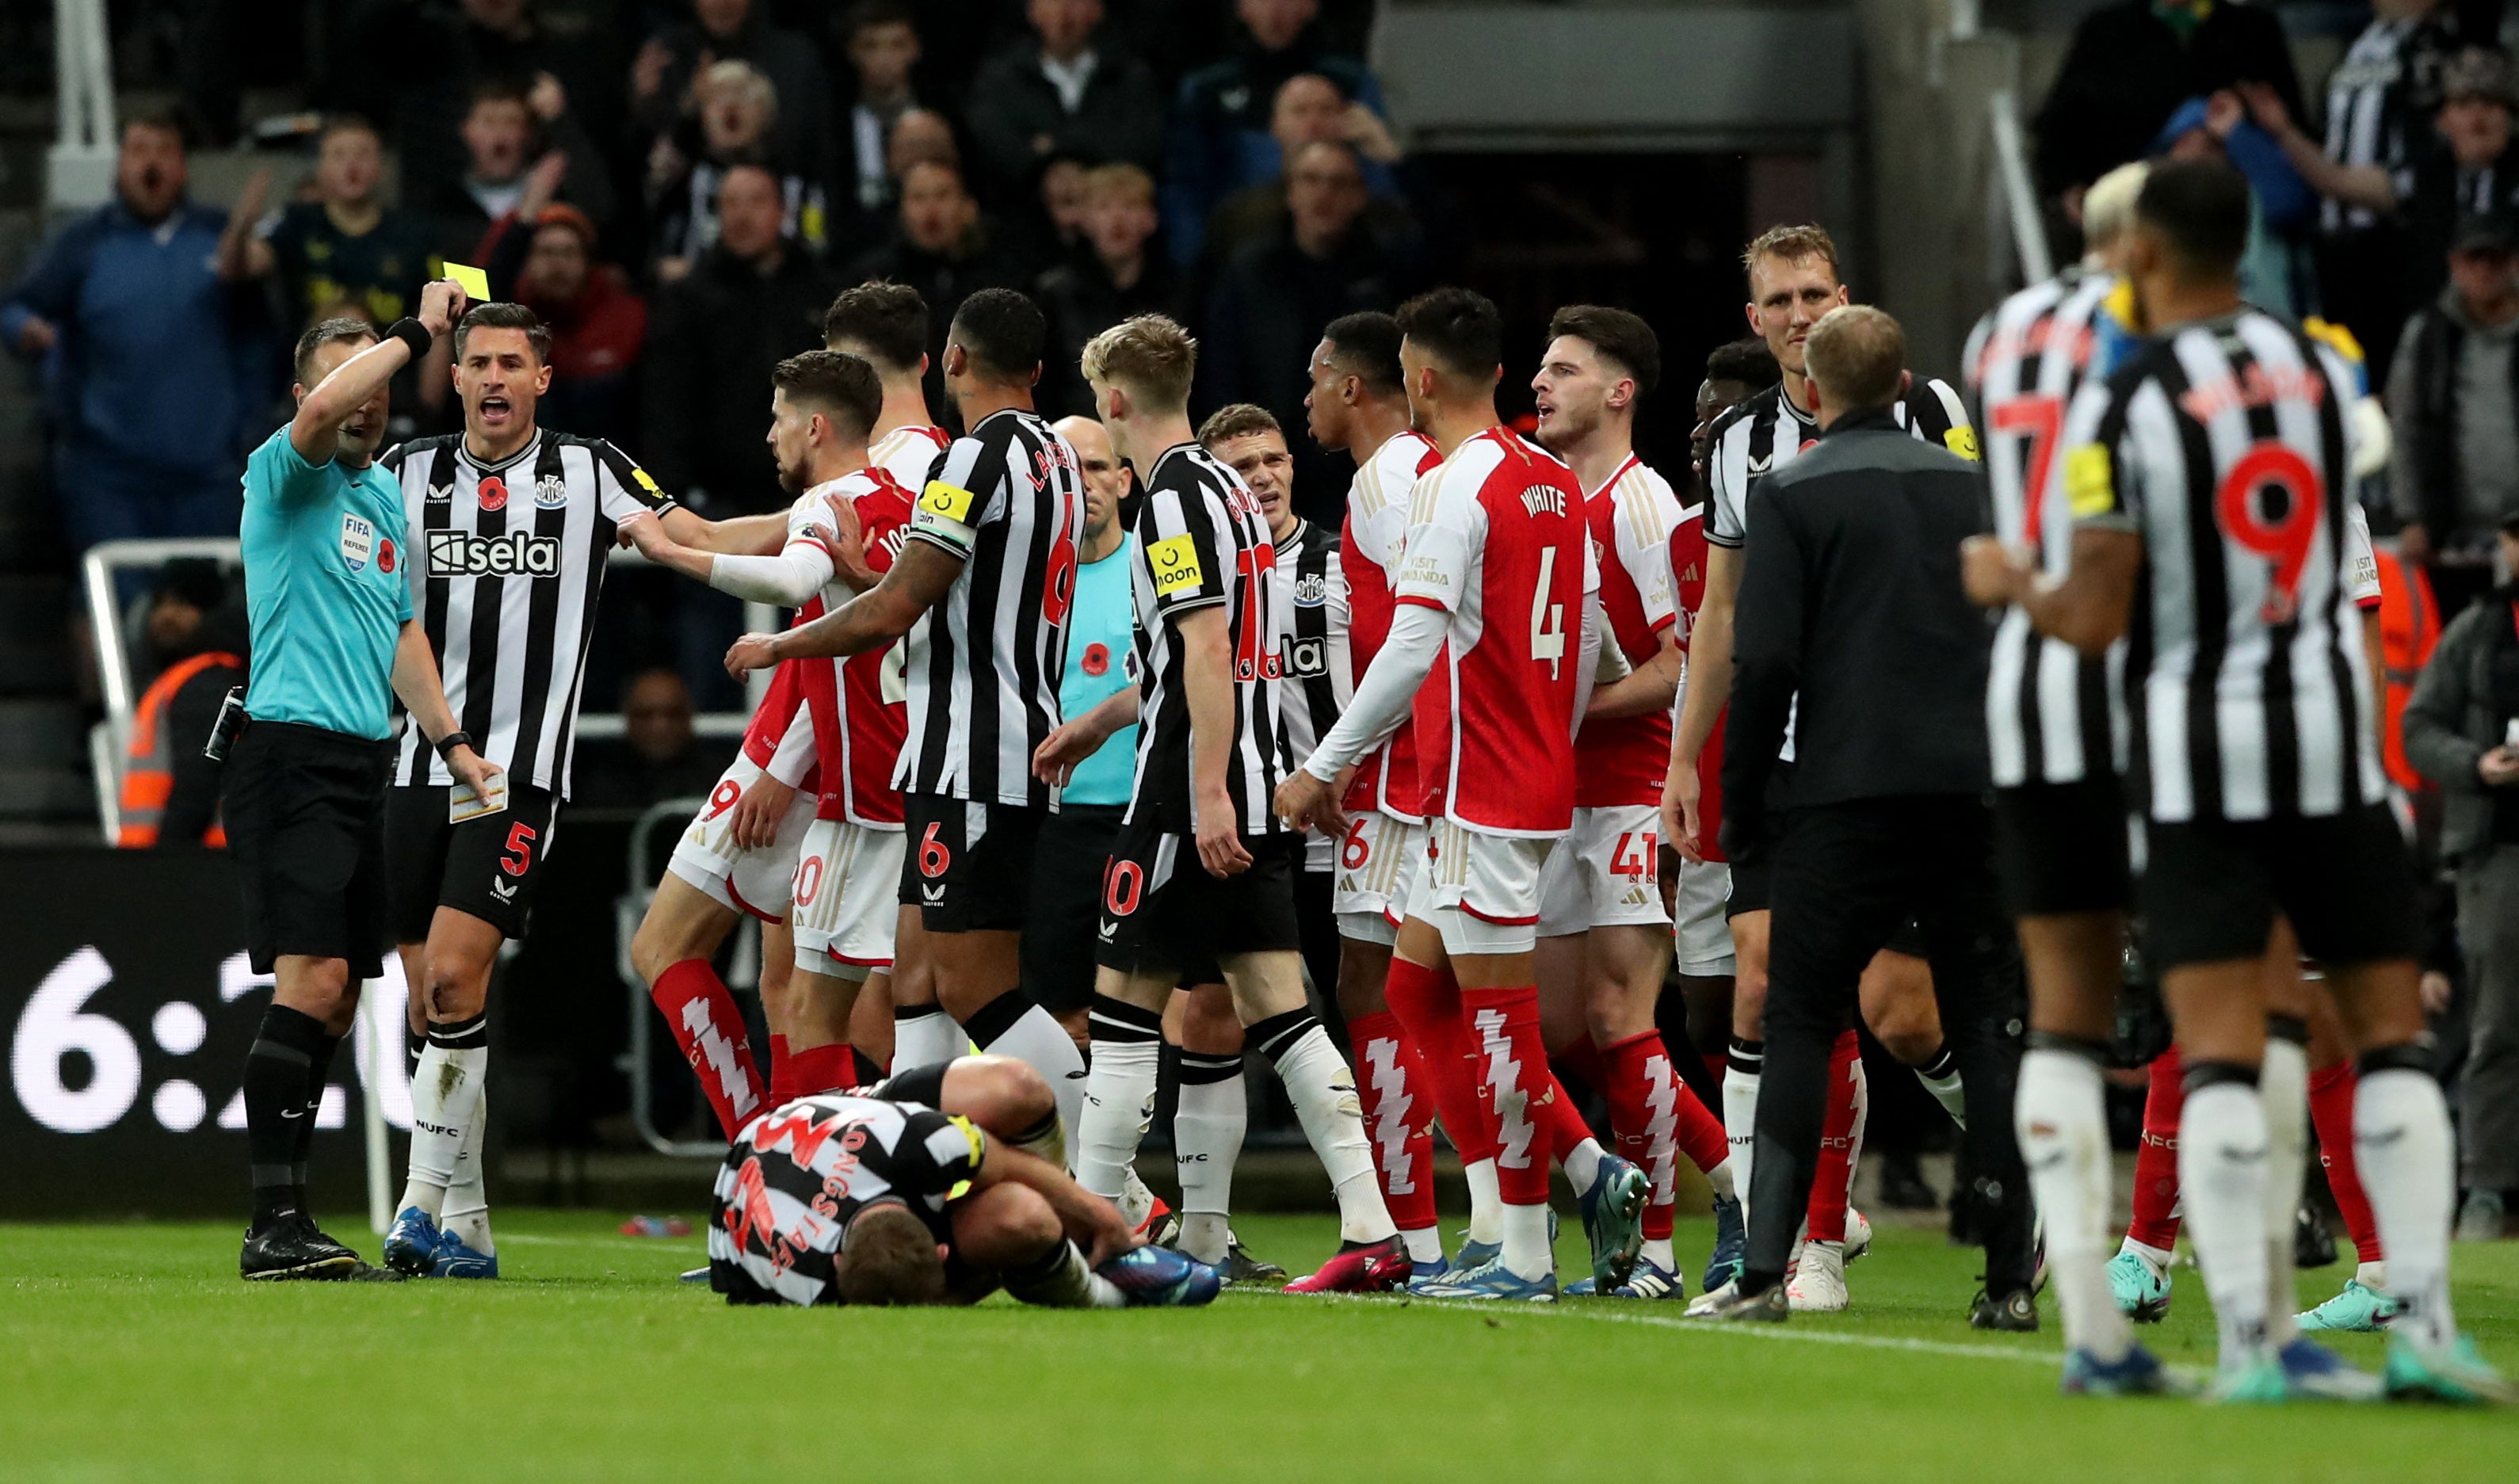 Kai Havertz sparked the rivalry between Arsenal and Newcastle